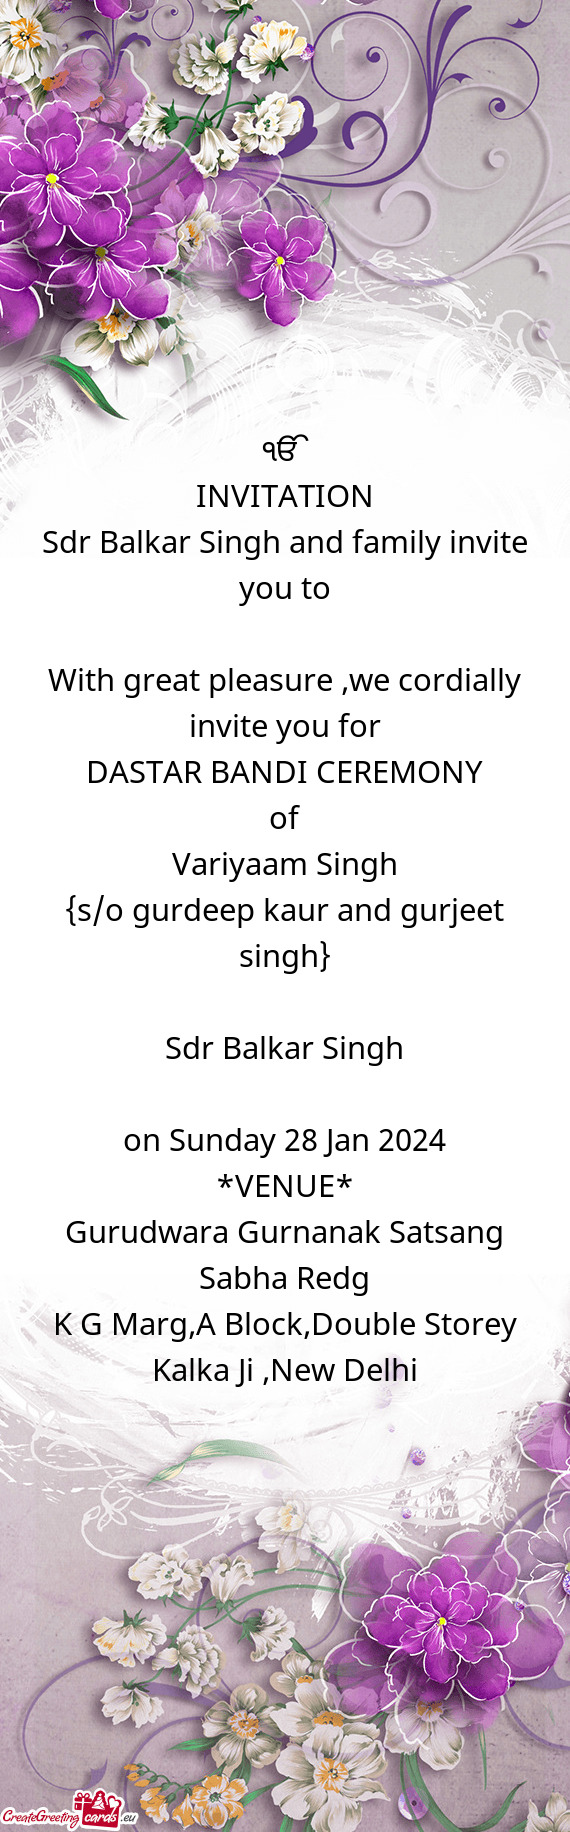 Sdr Balkar Singh and family invite you to